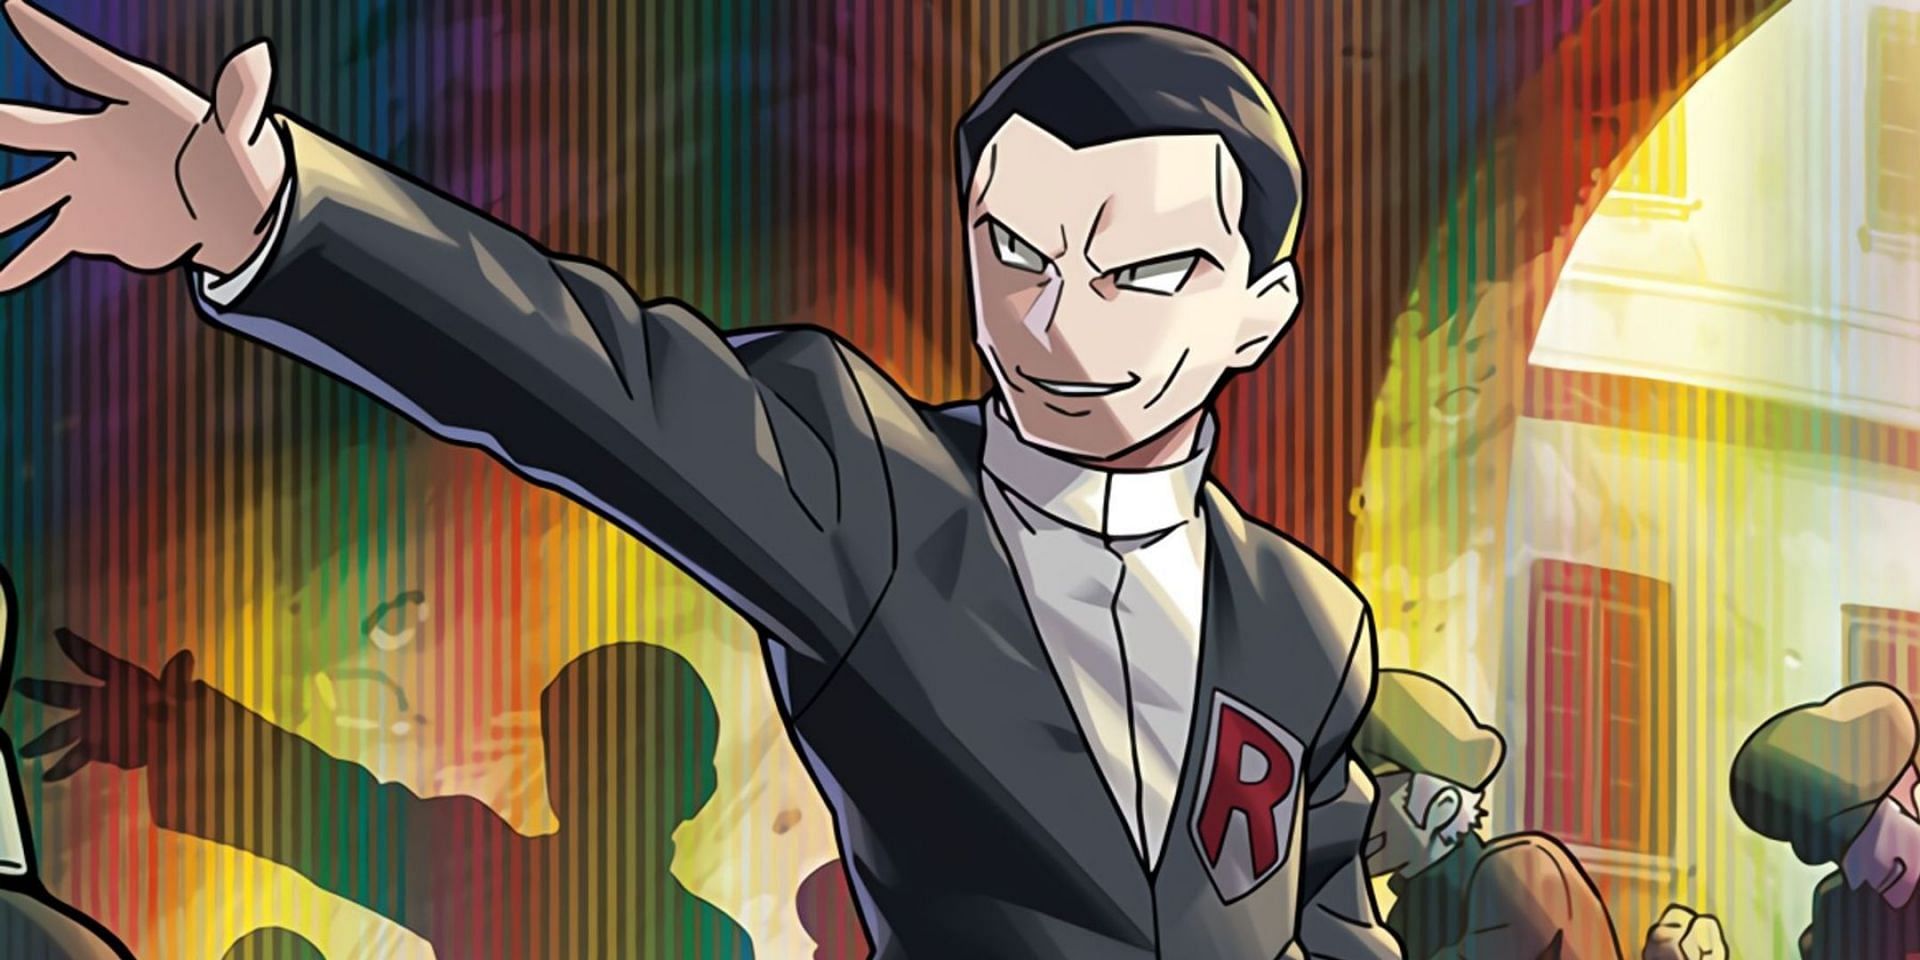 Giovanni as he appears in the trading card game (Image via The Pokemon Company)